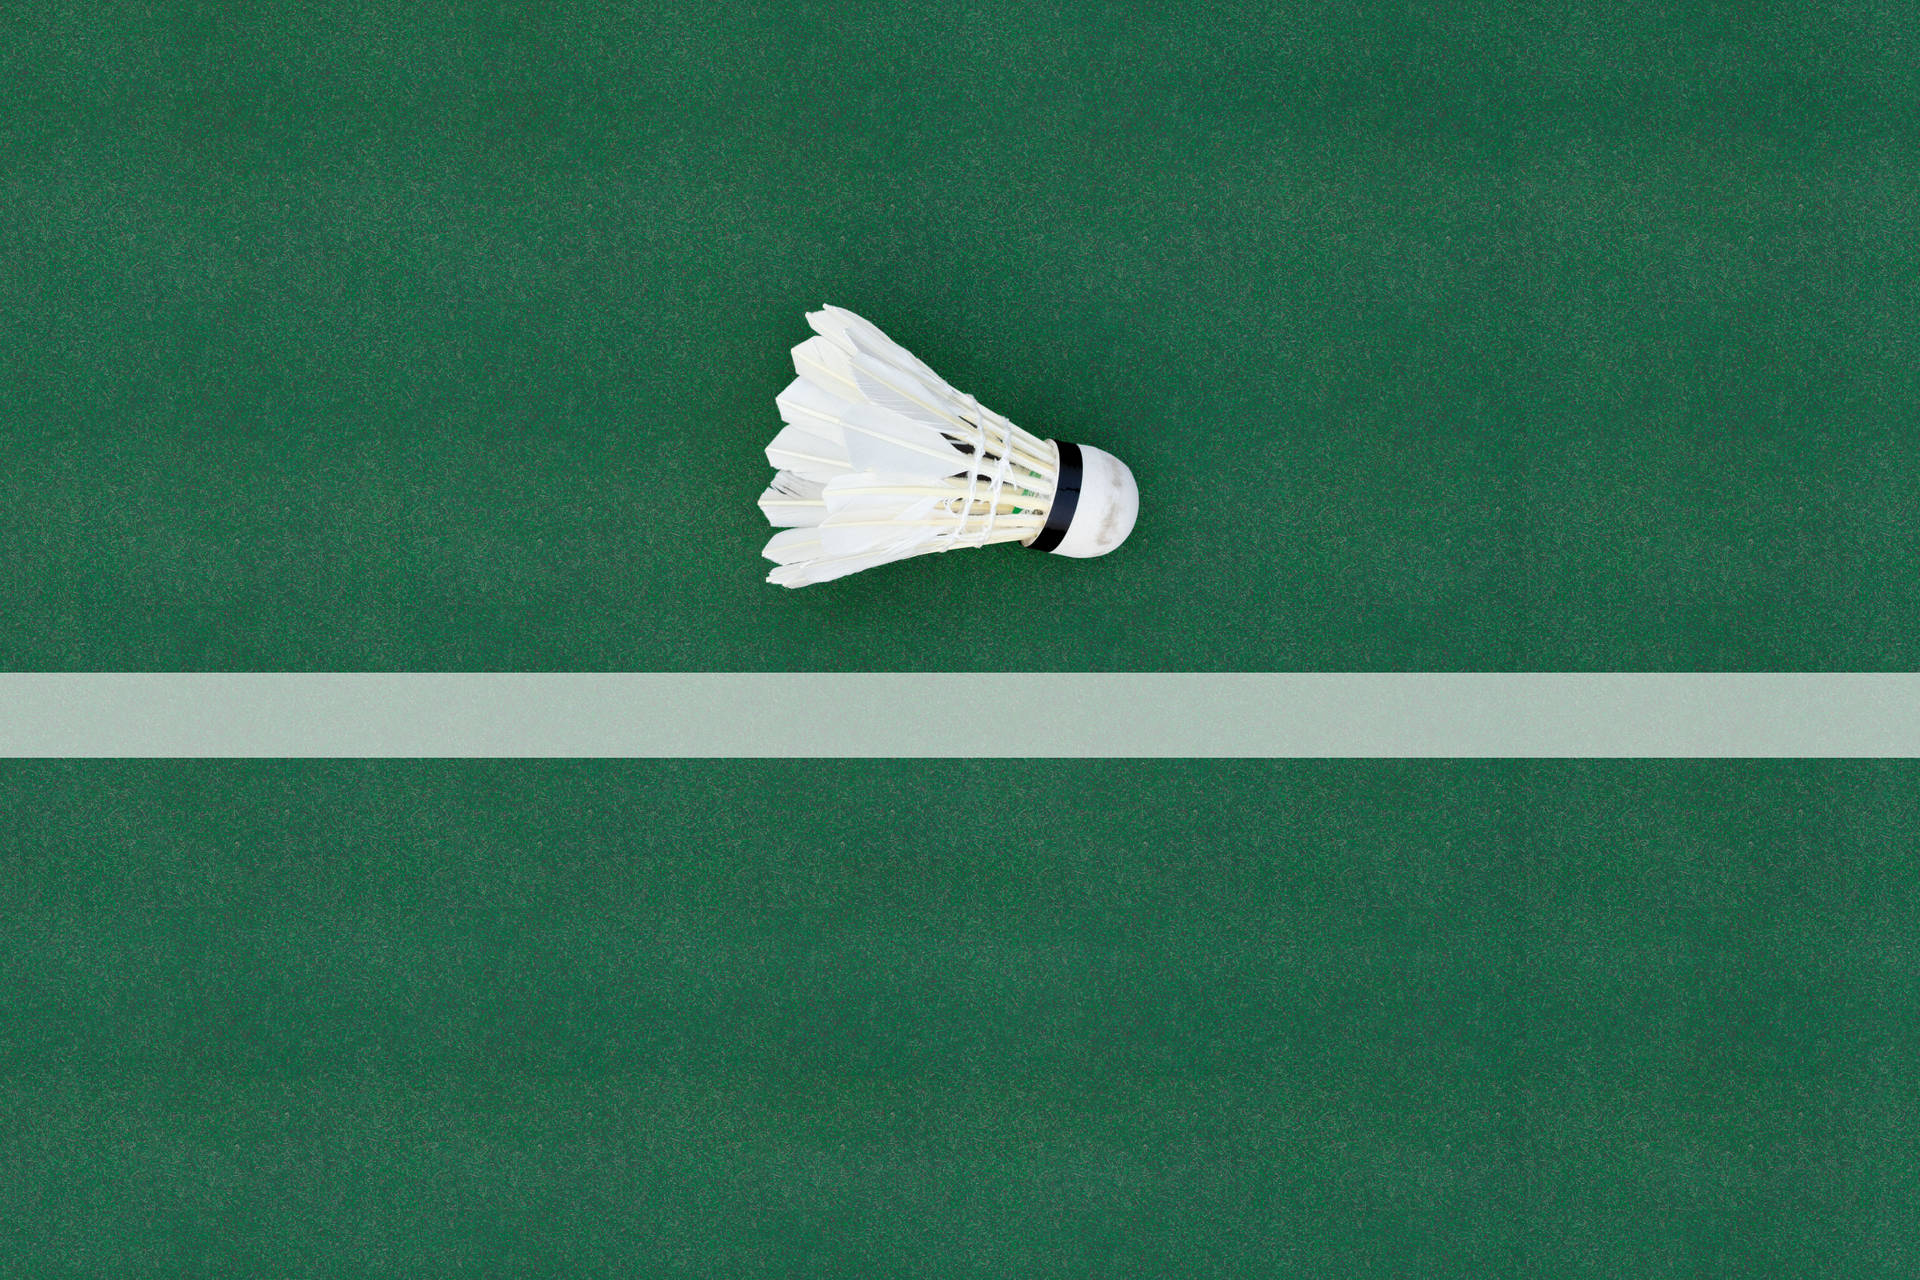 Badminton 6000X4000 Wallpaper and Background Image